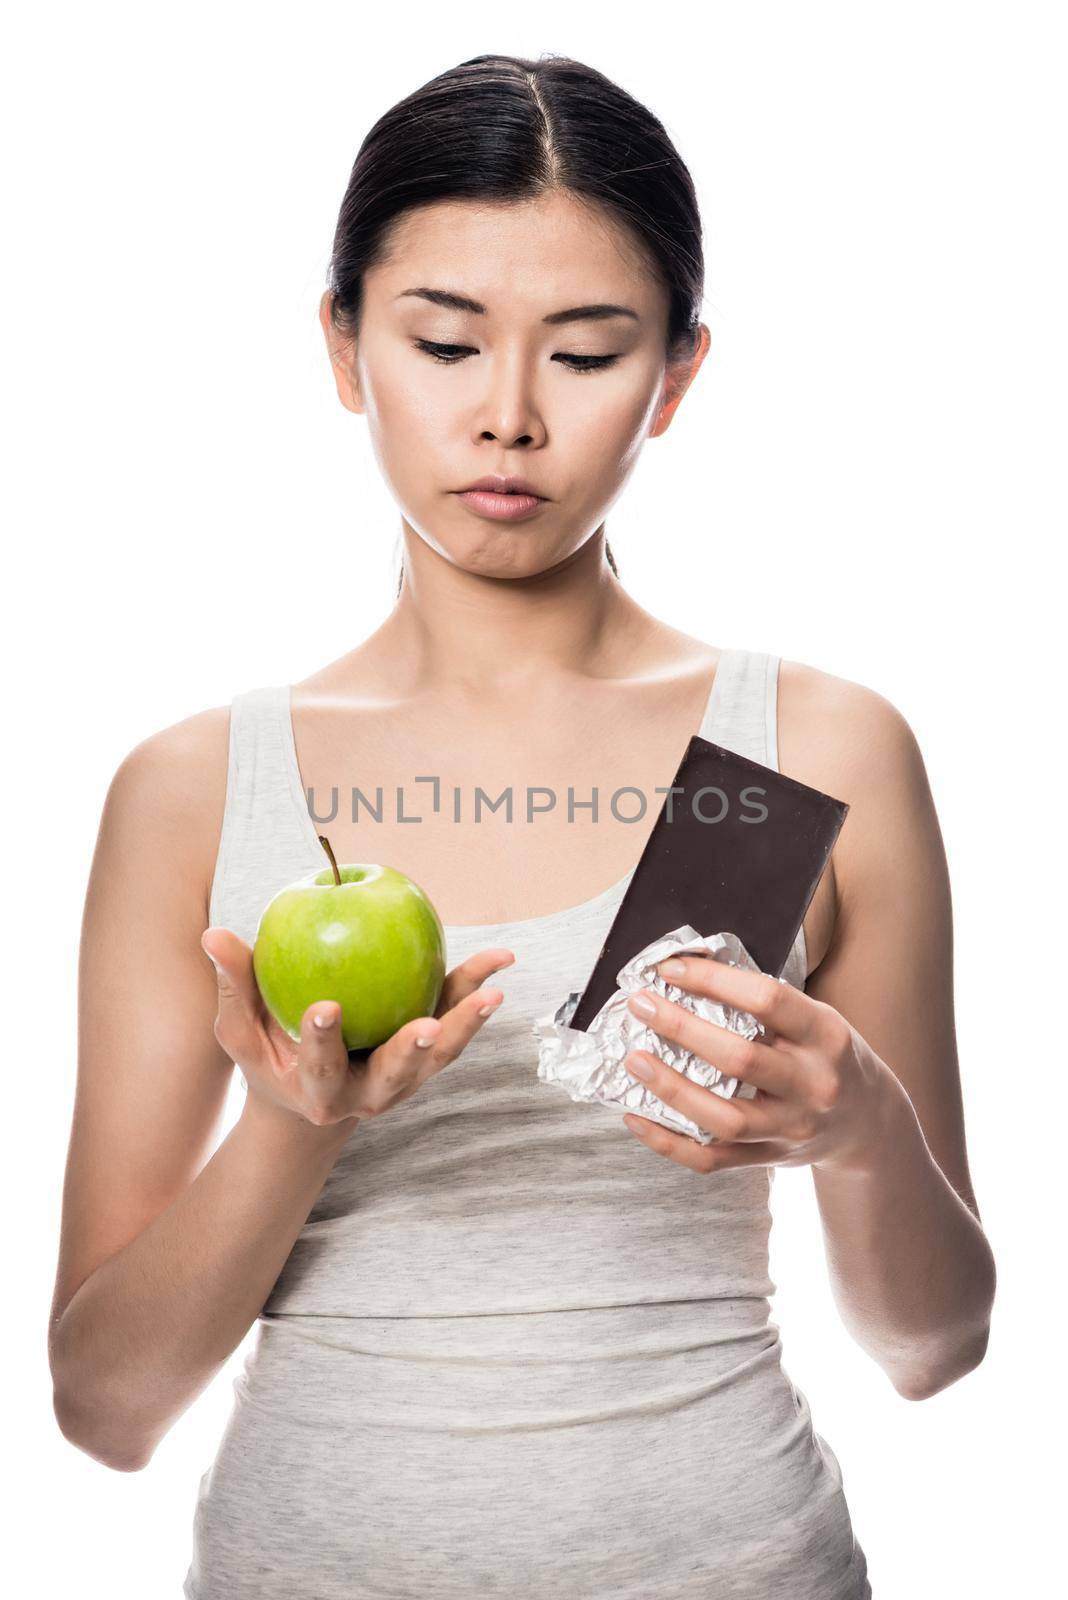 Pretty Asian woman debating an apple or chocolate as she stands with a fresh green apple in one hand and unwrapped bar of candy in the other in a healthy diet concept